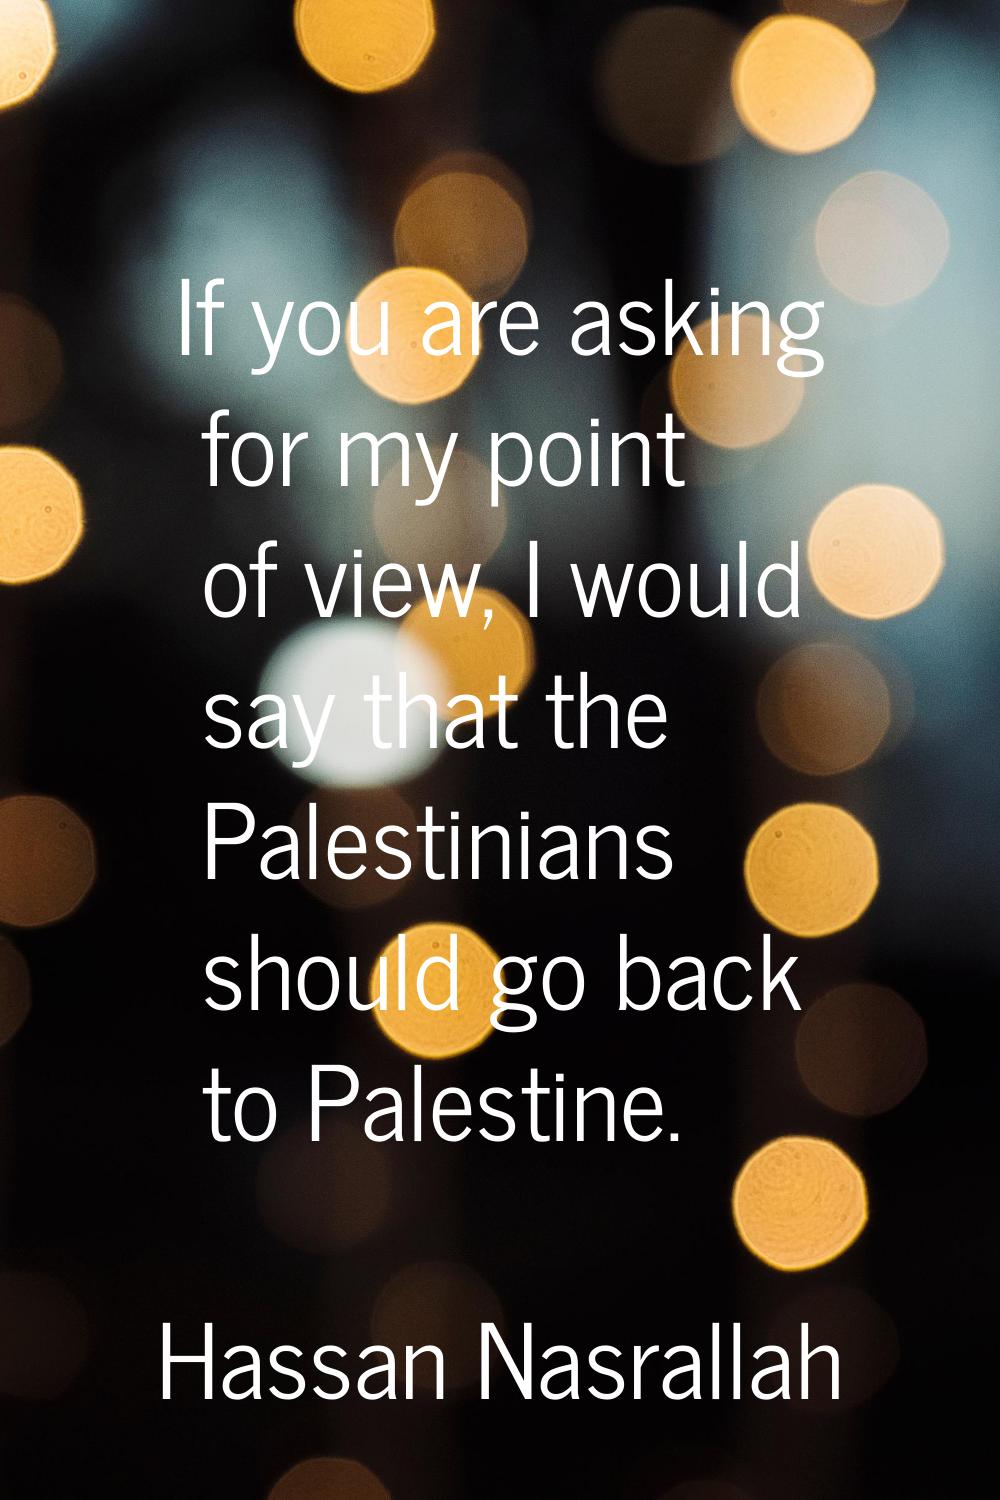 If you are asking for my point of view, I would say that the Palestinians should go back to Palesti